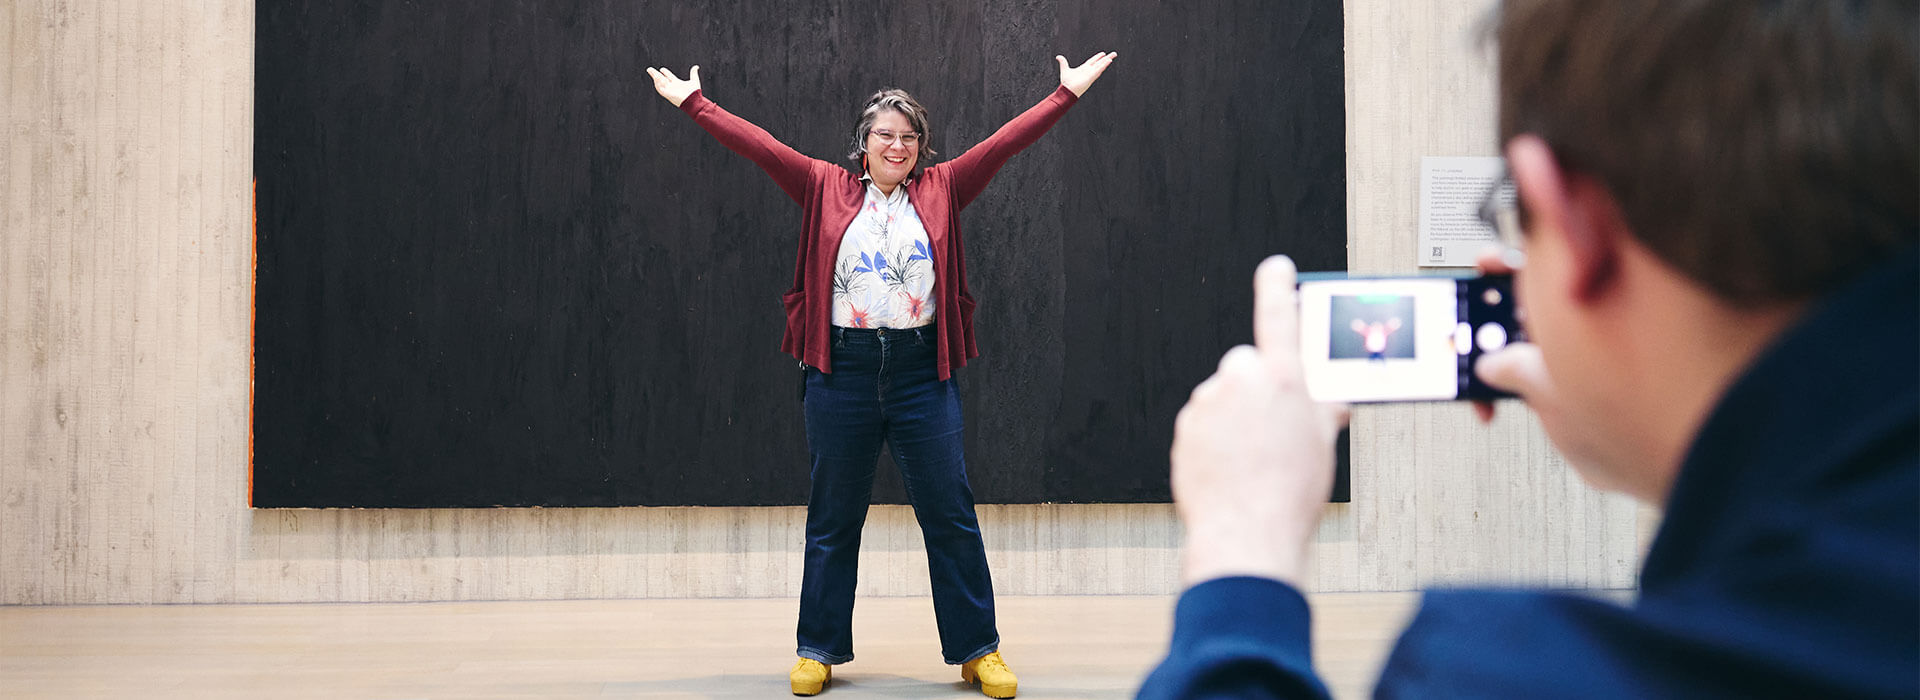 A man takes a photo of his wife in front of a big black abstract painting with his phone while she sticks her arms up in the air